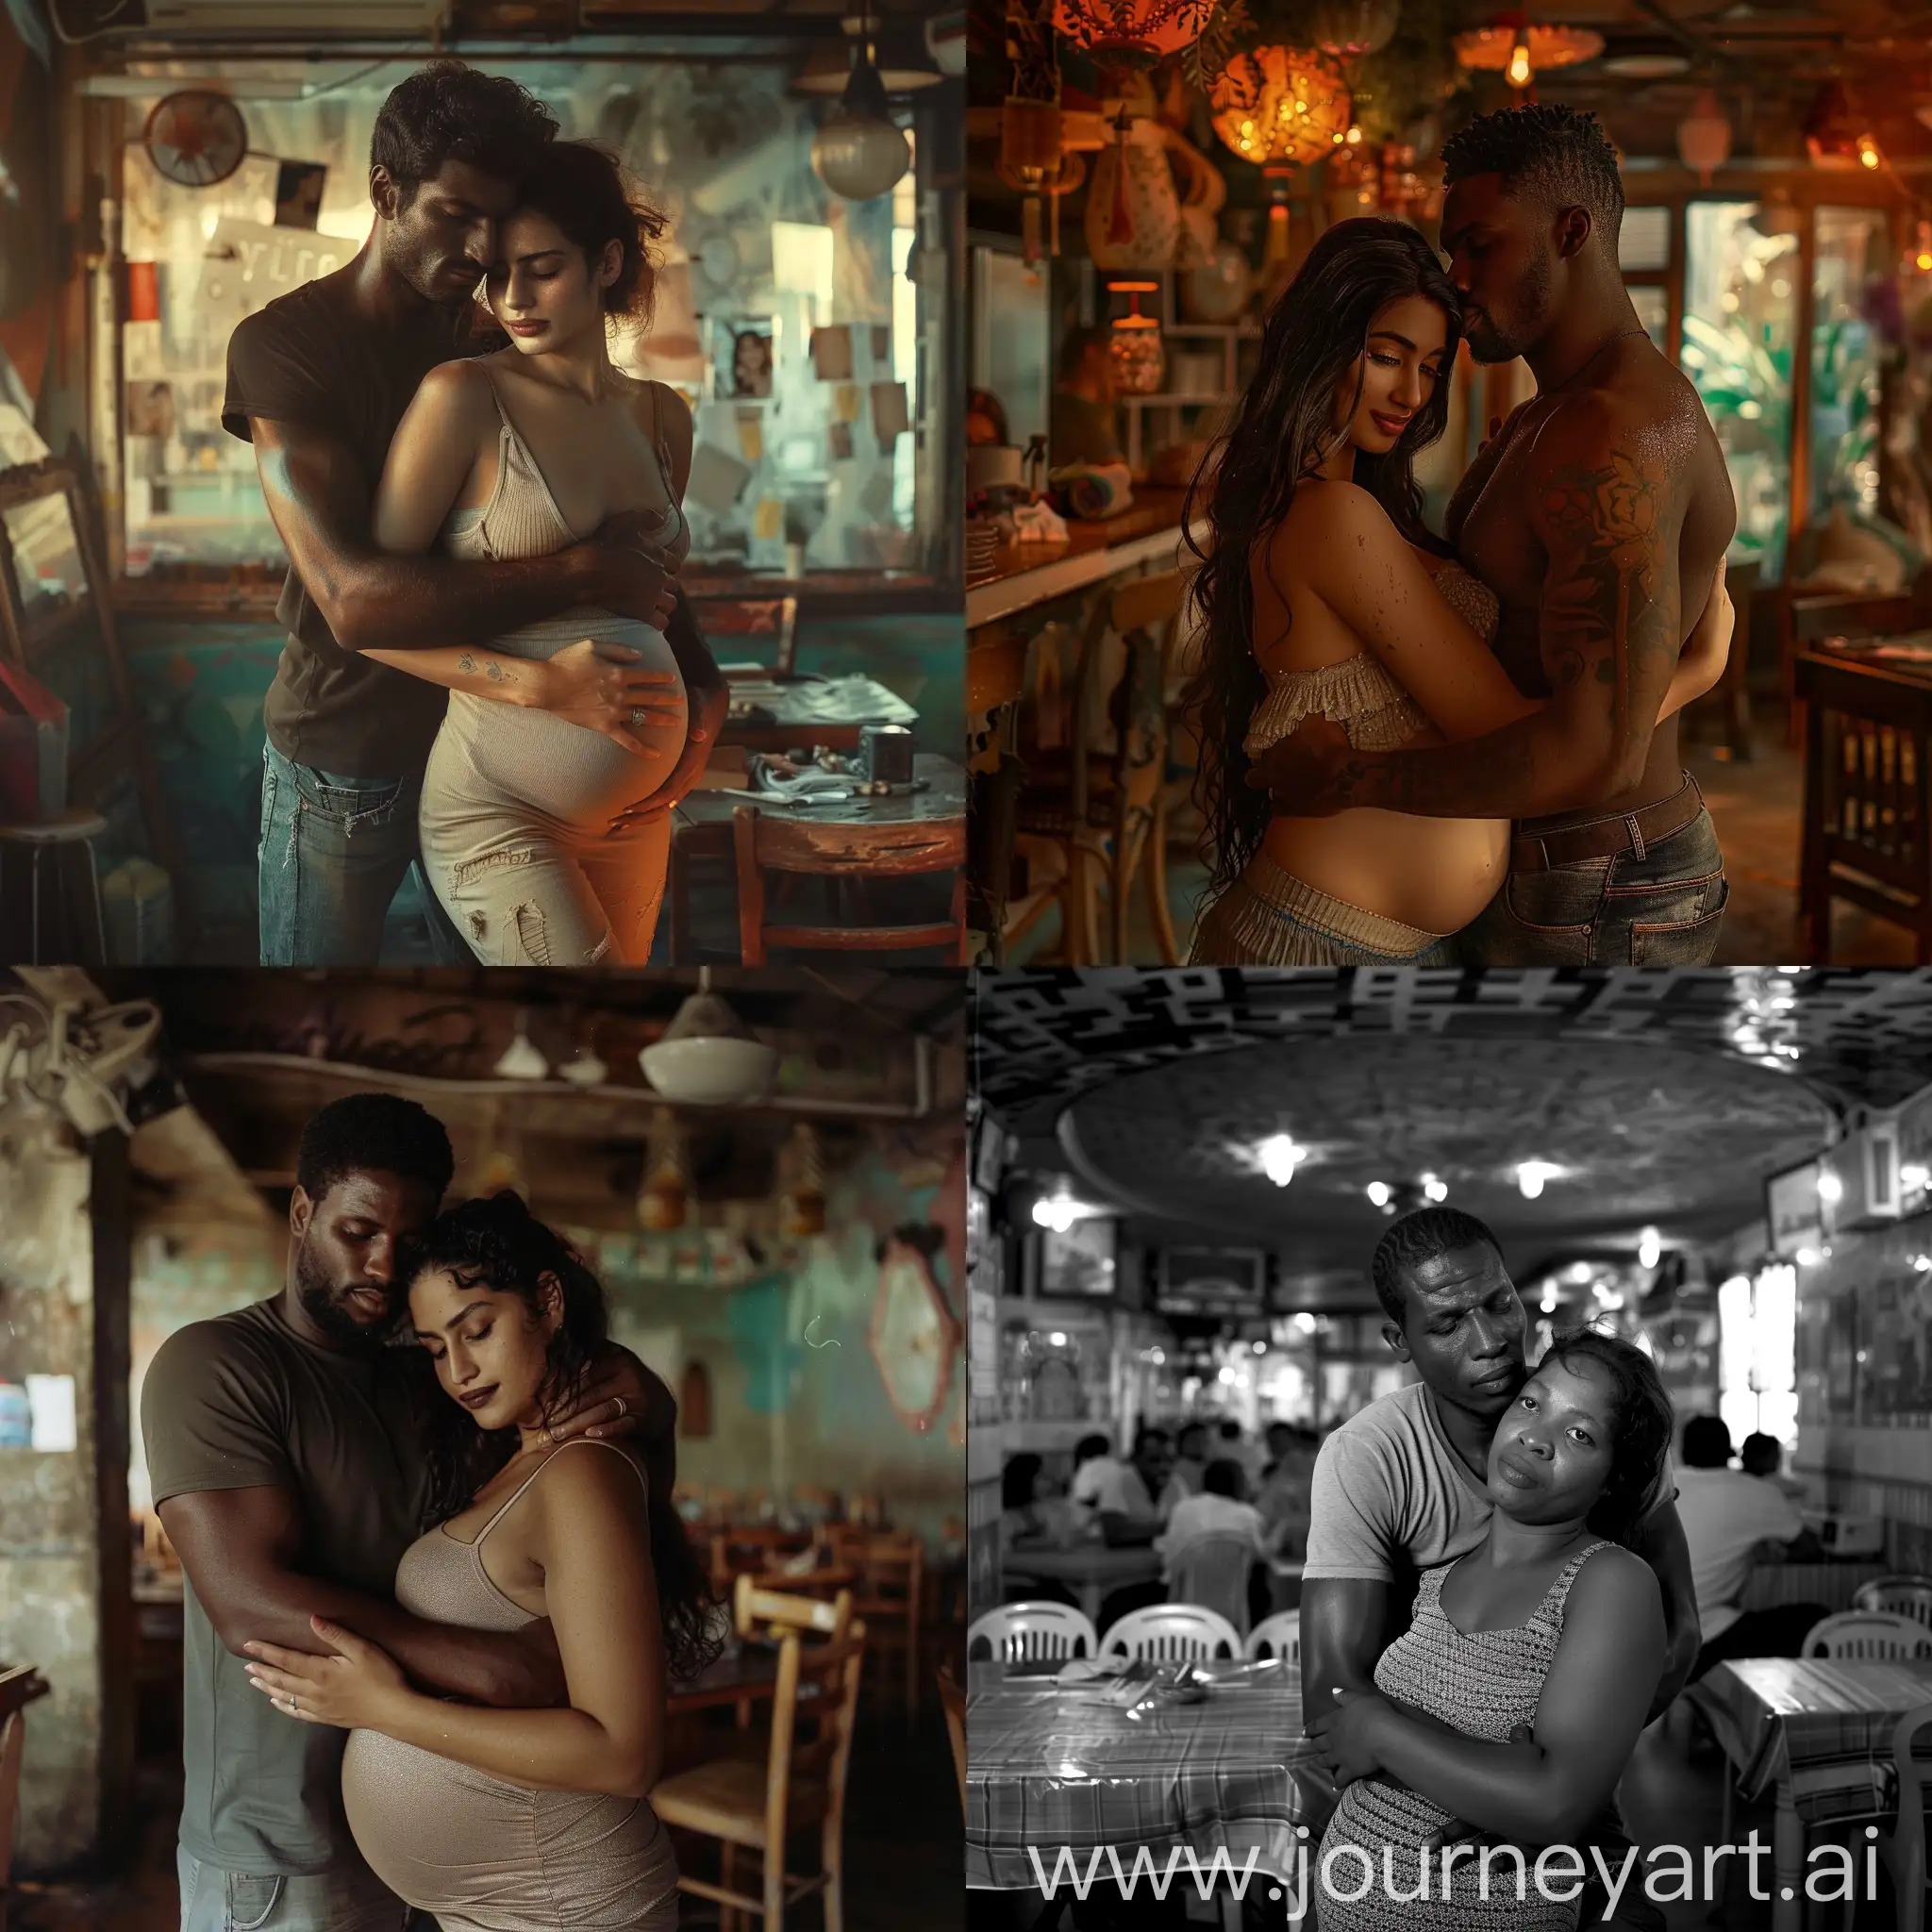 Romantic-Iraqi-Woman-Embraced-by-African-Partner-in-Open-Restaurant-Setting